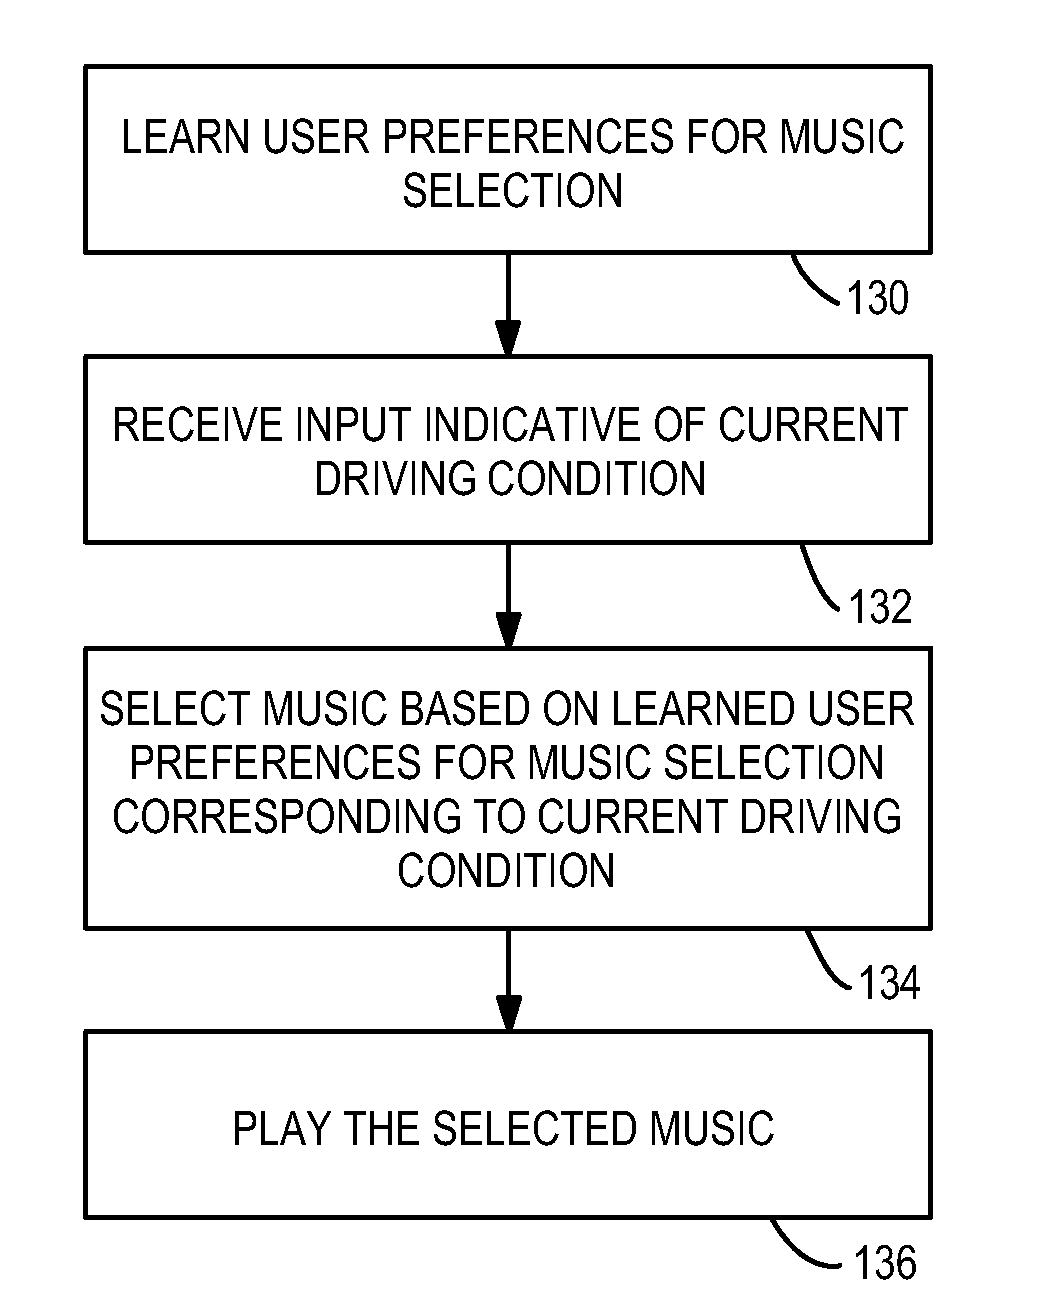 Intelligent music selection in vehicles